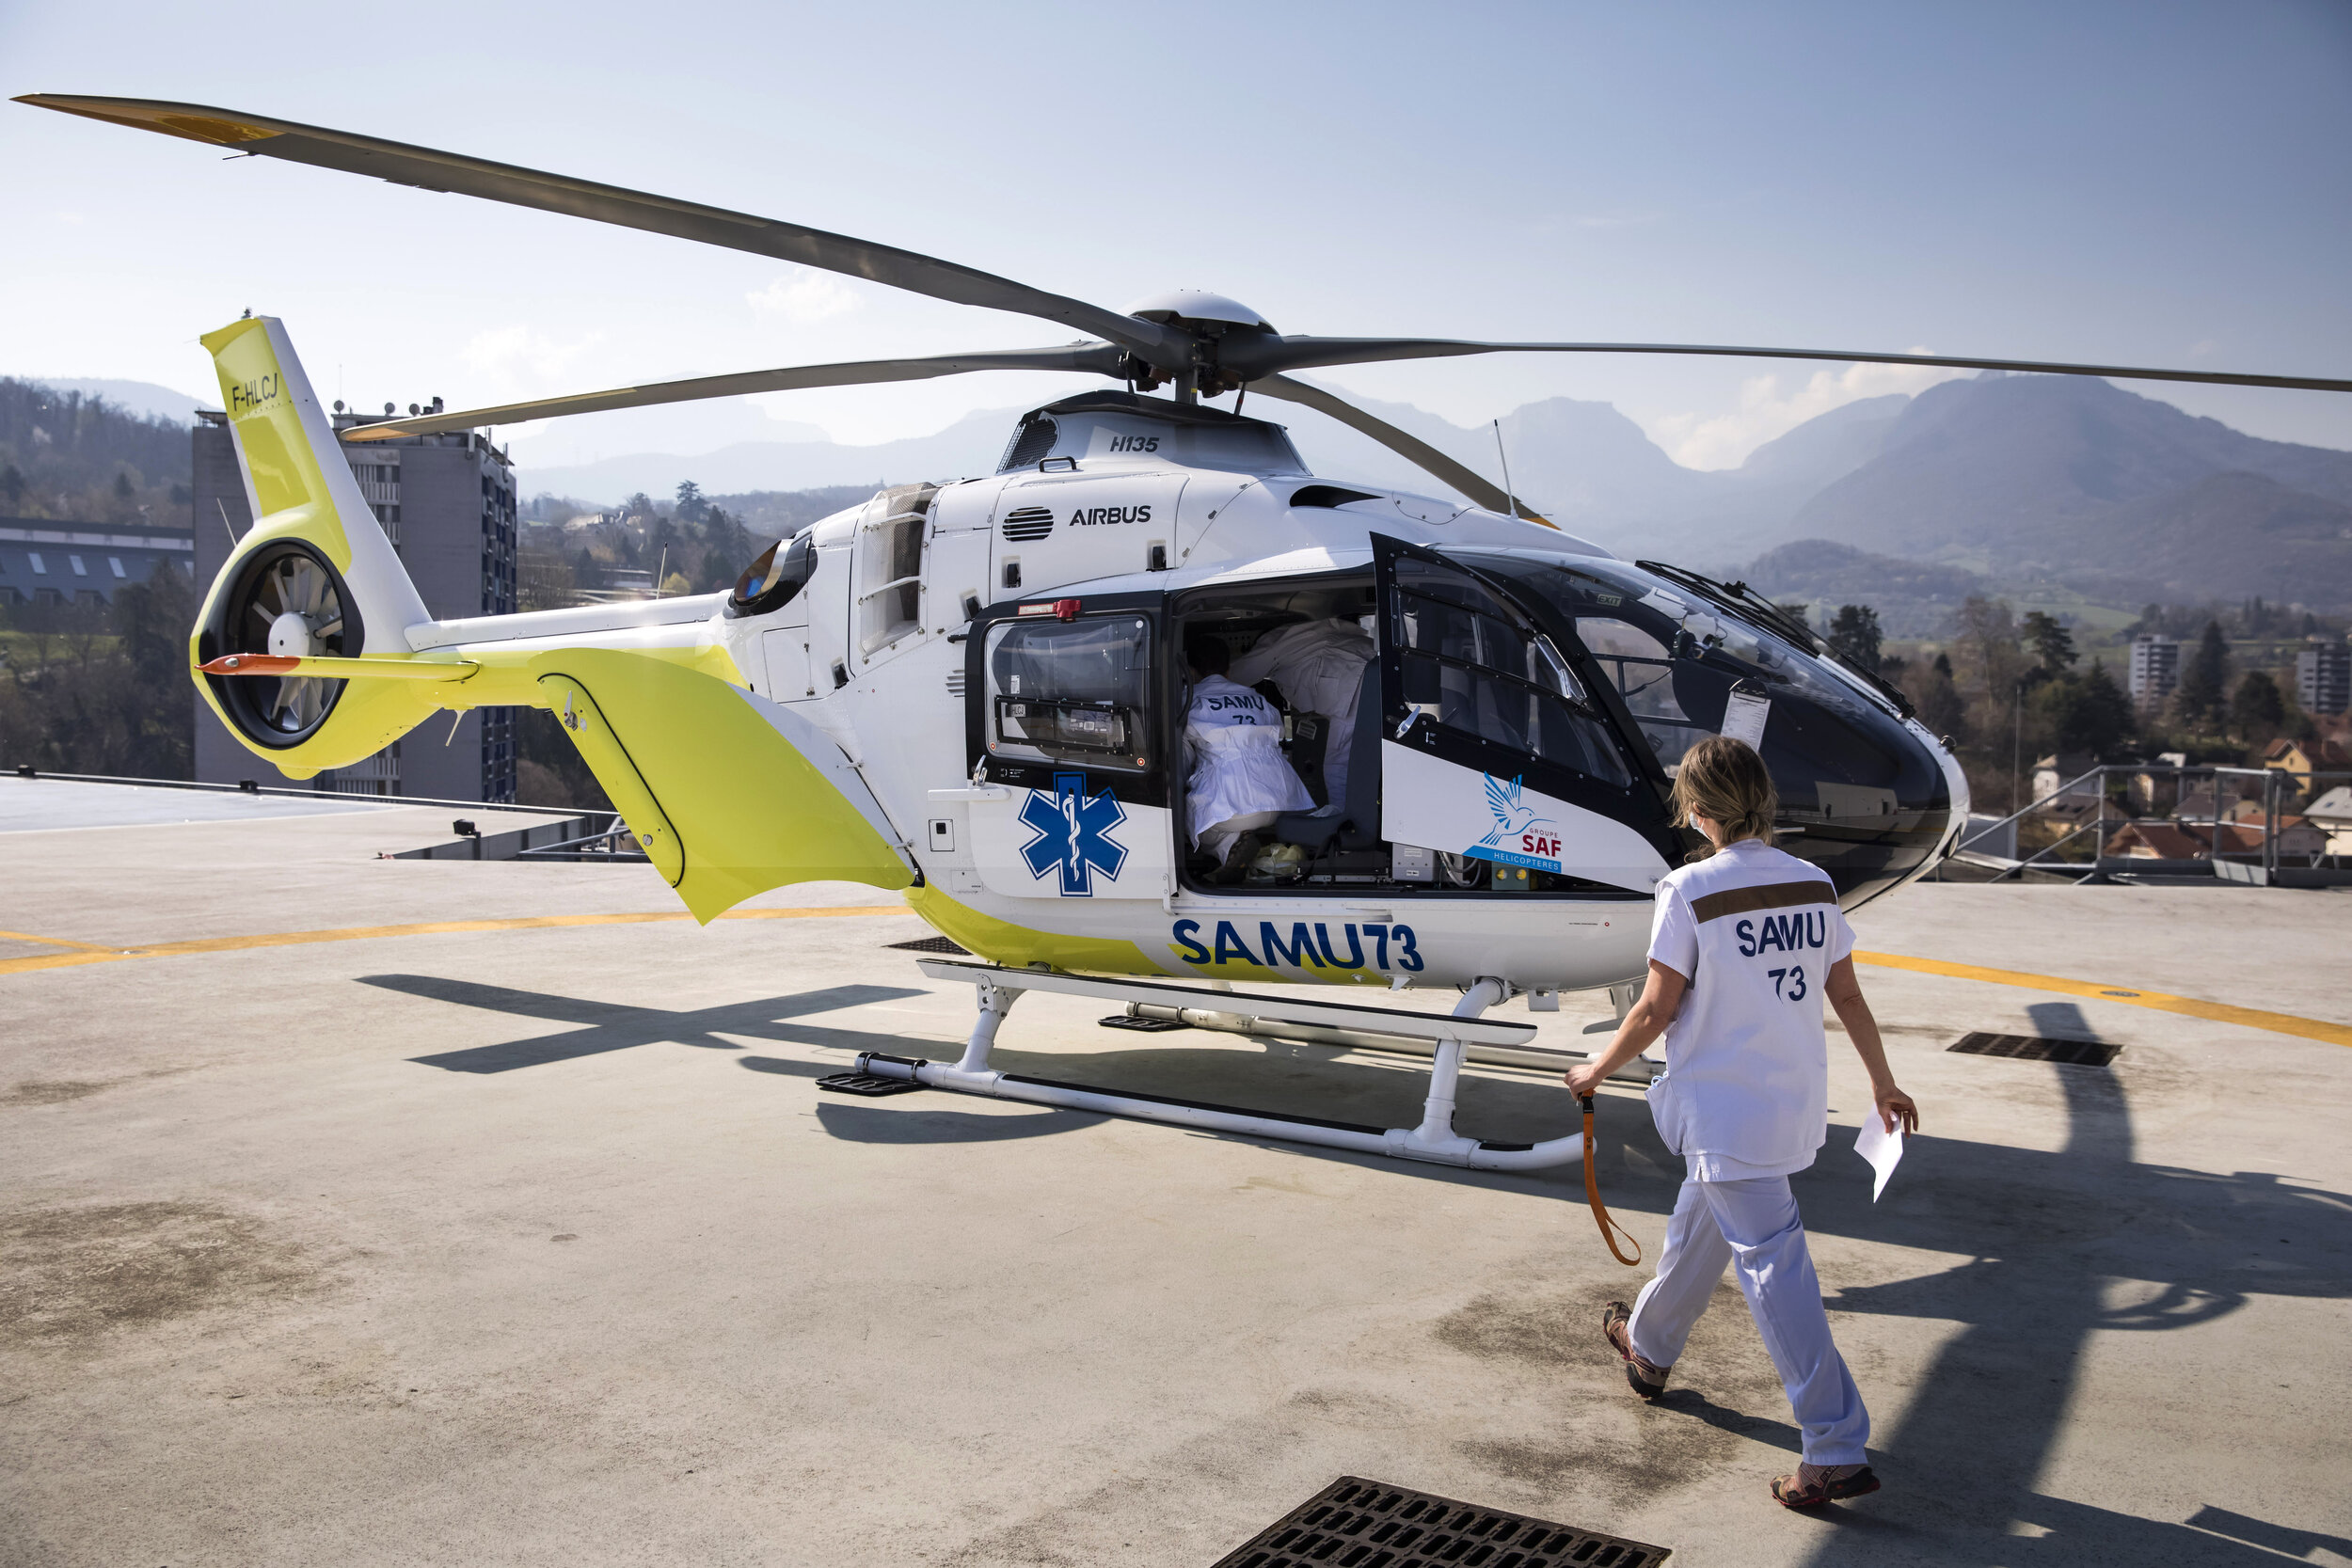   © Vincent Isore/IP3 ; Chambery, France March 26, 2020 - Report at the Metropole Savoie Hospital Center (Centre hospitalier Metropole Savoie) during the Coronavirus health crisis (COVID-19) - Emergency medical services (SAMU) staff member prepare th